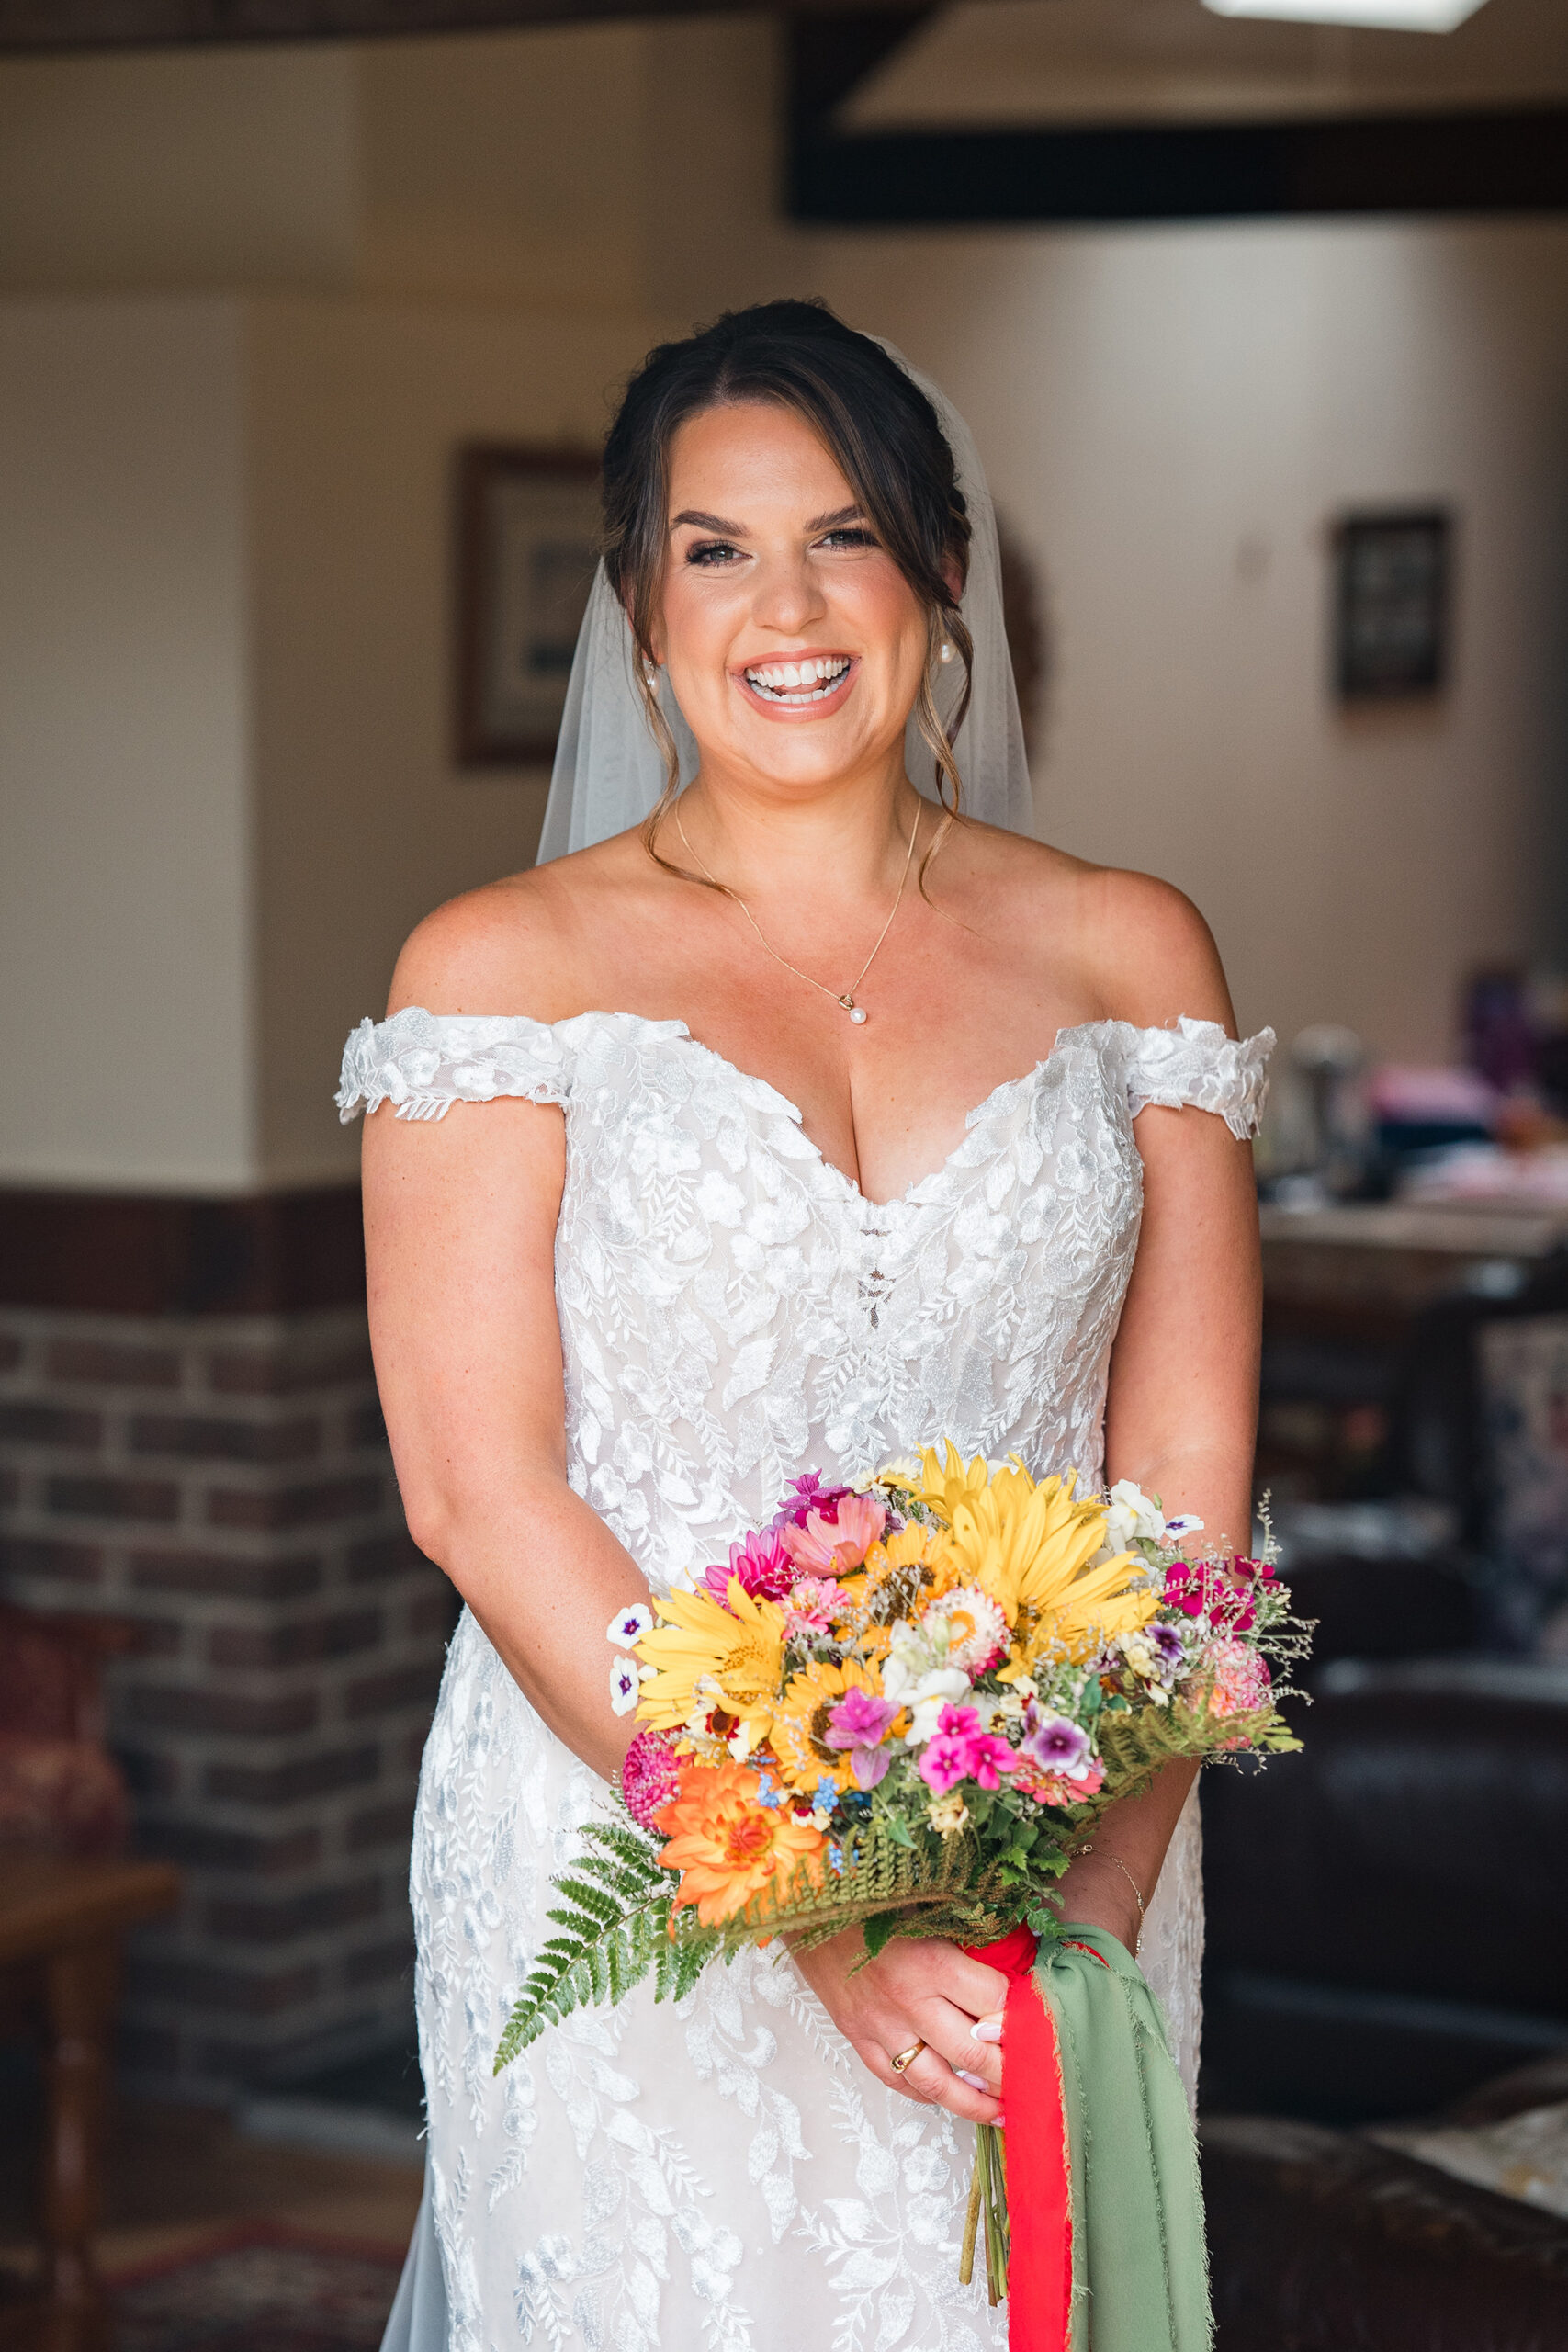 Bride smiling in lace dress with colourful bouquet on wedding day